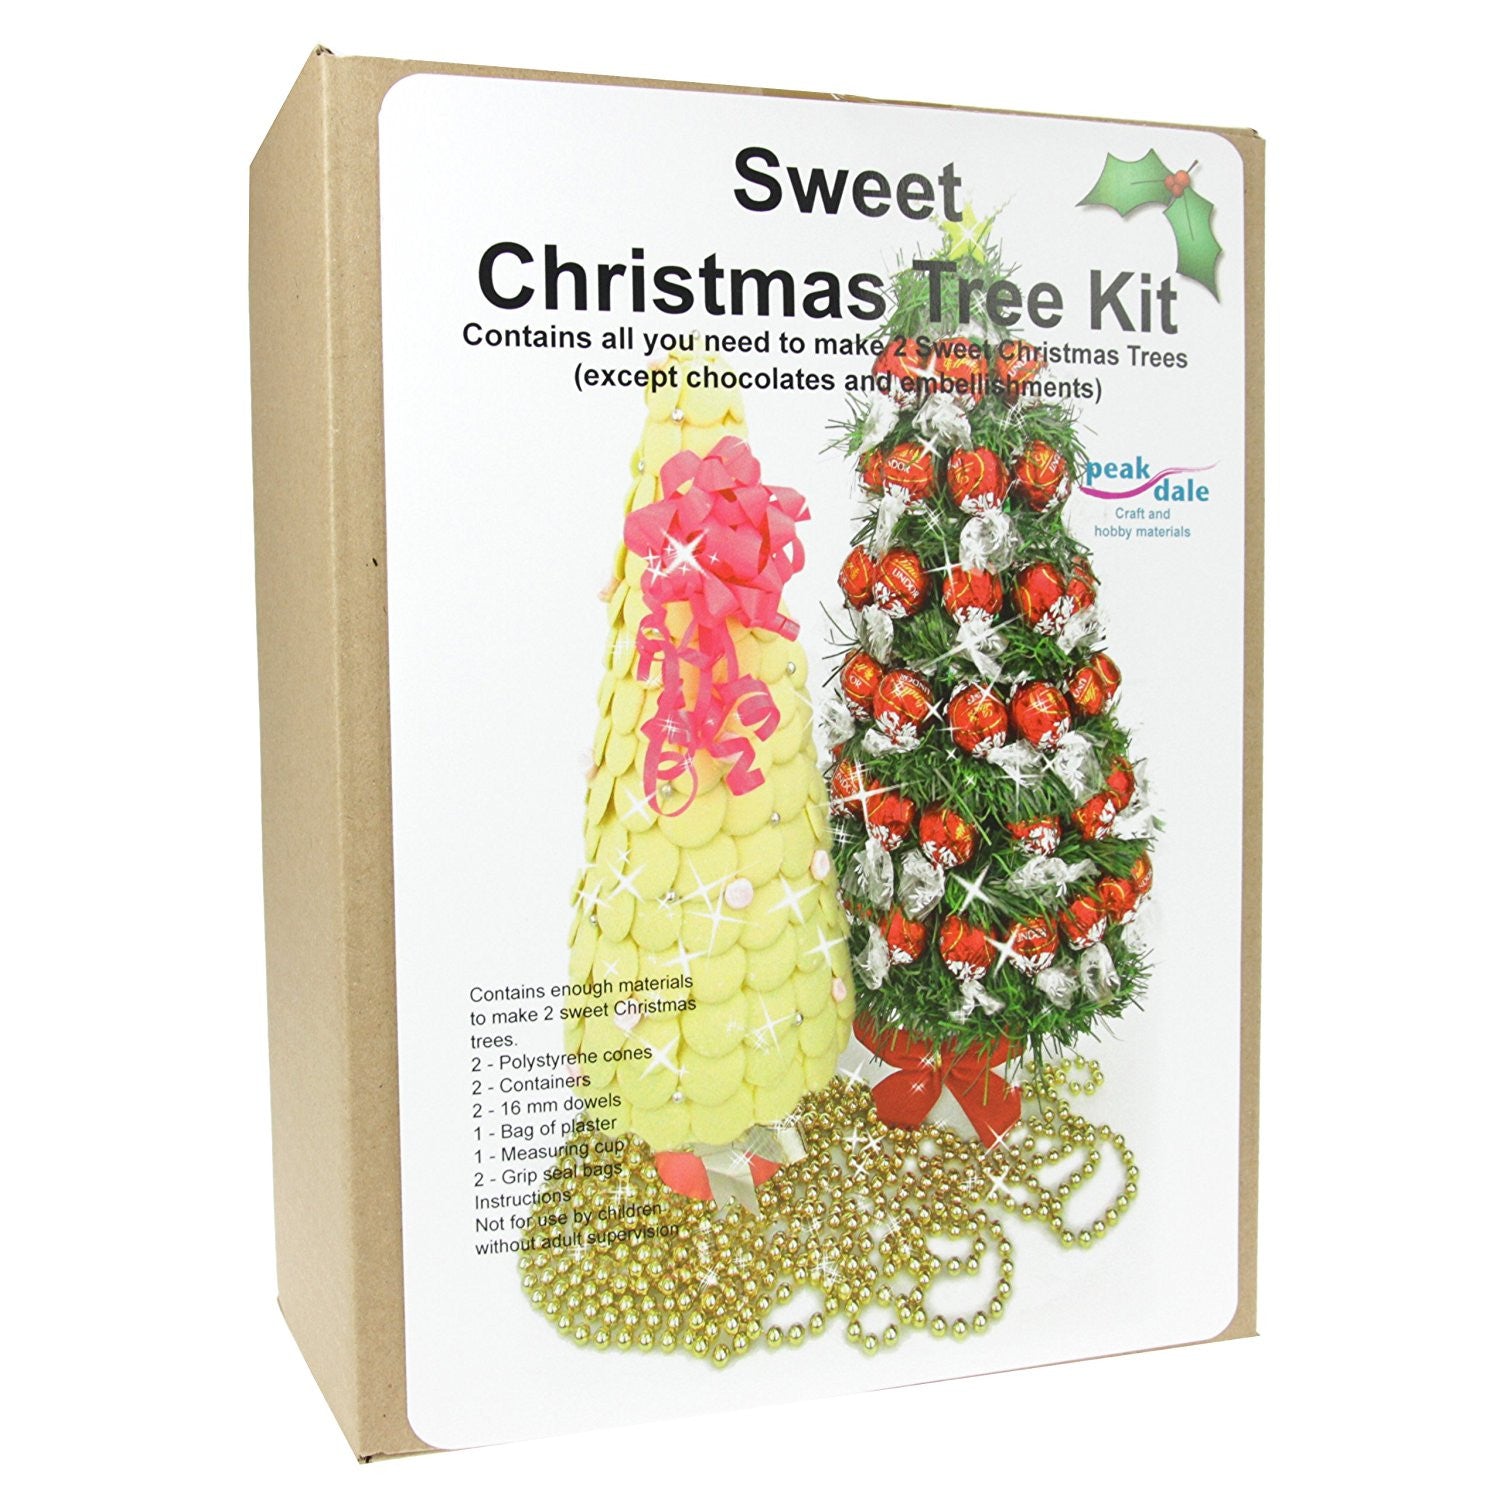 Make your own - Sweet Christmas Tree Kit, Polystyrene cones, containers, plaster